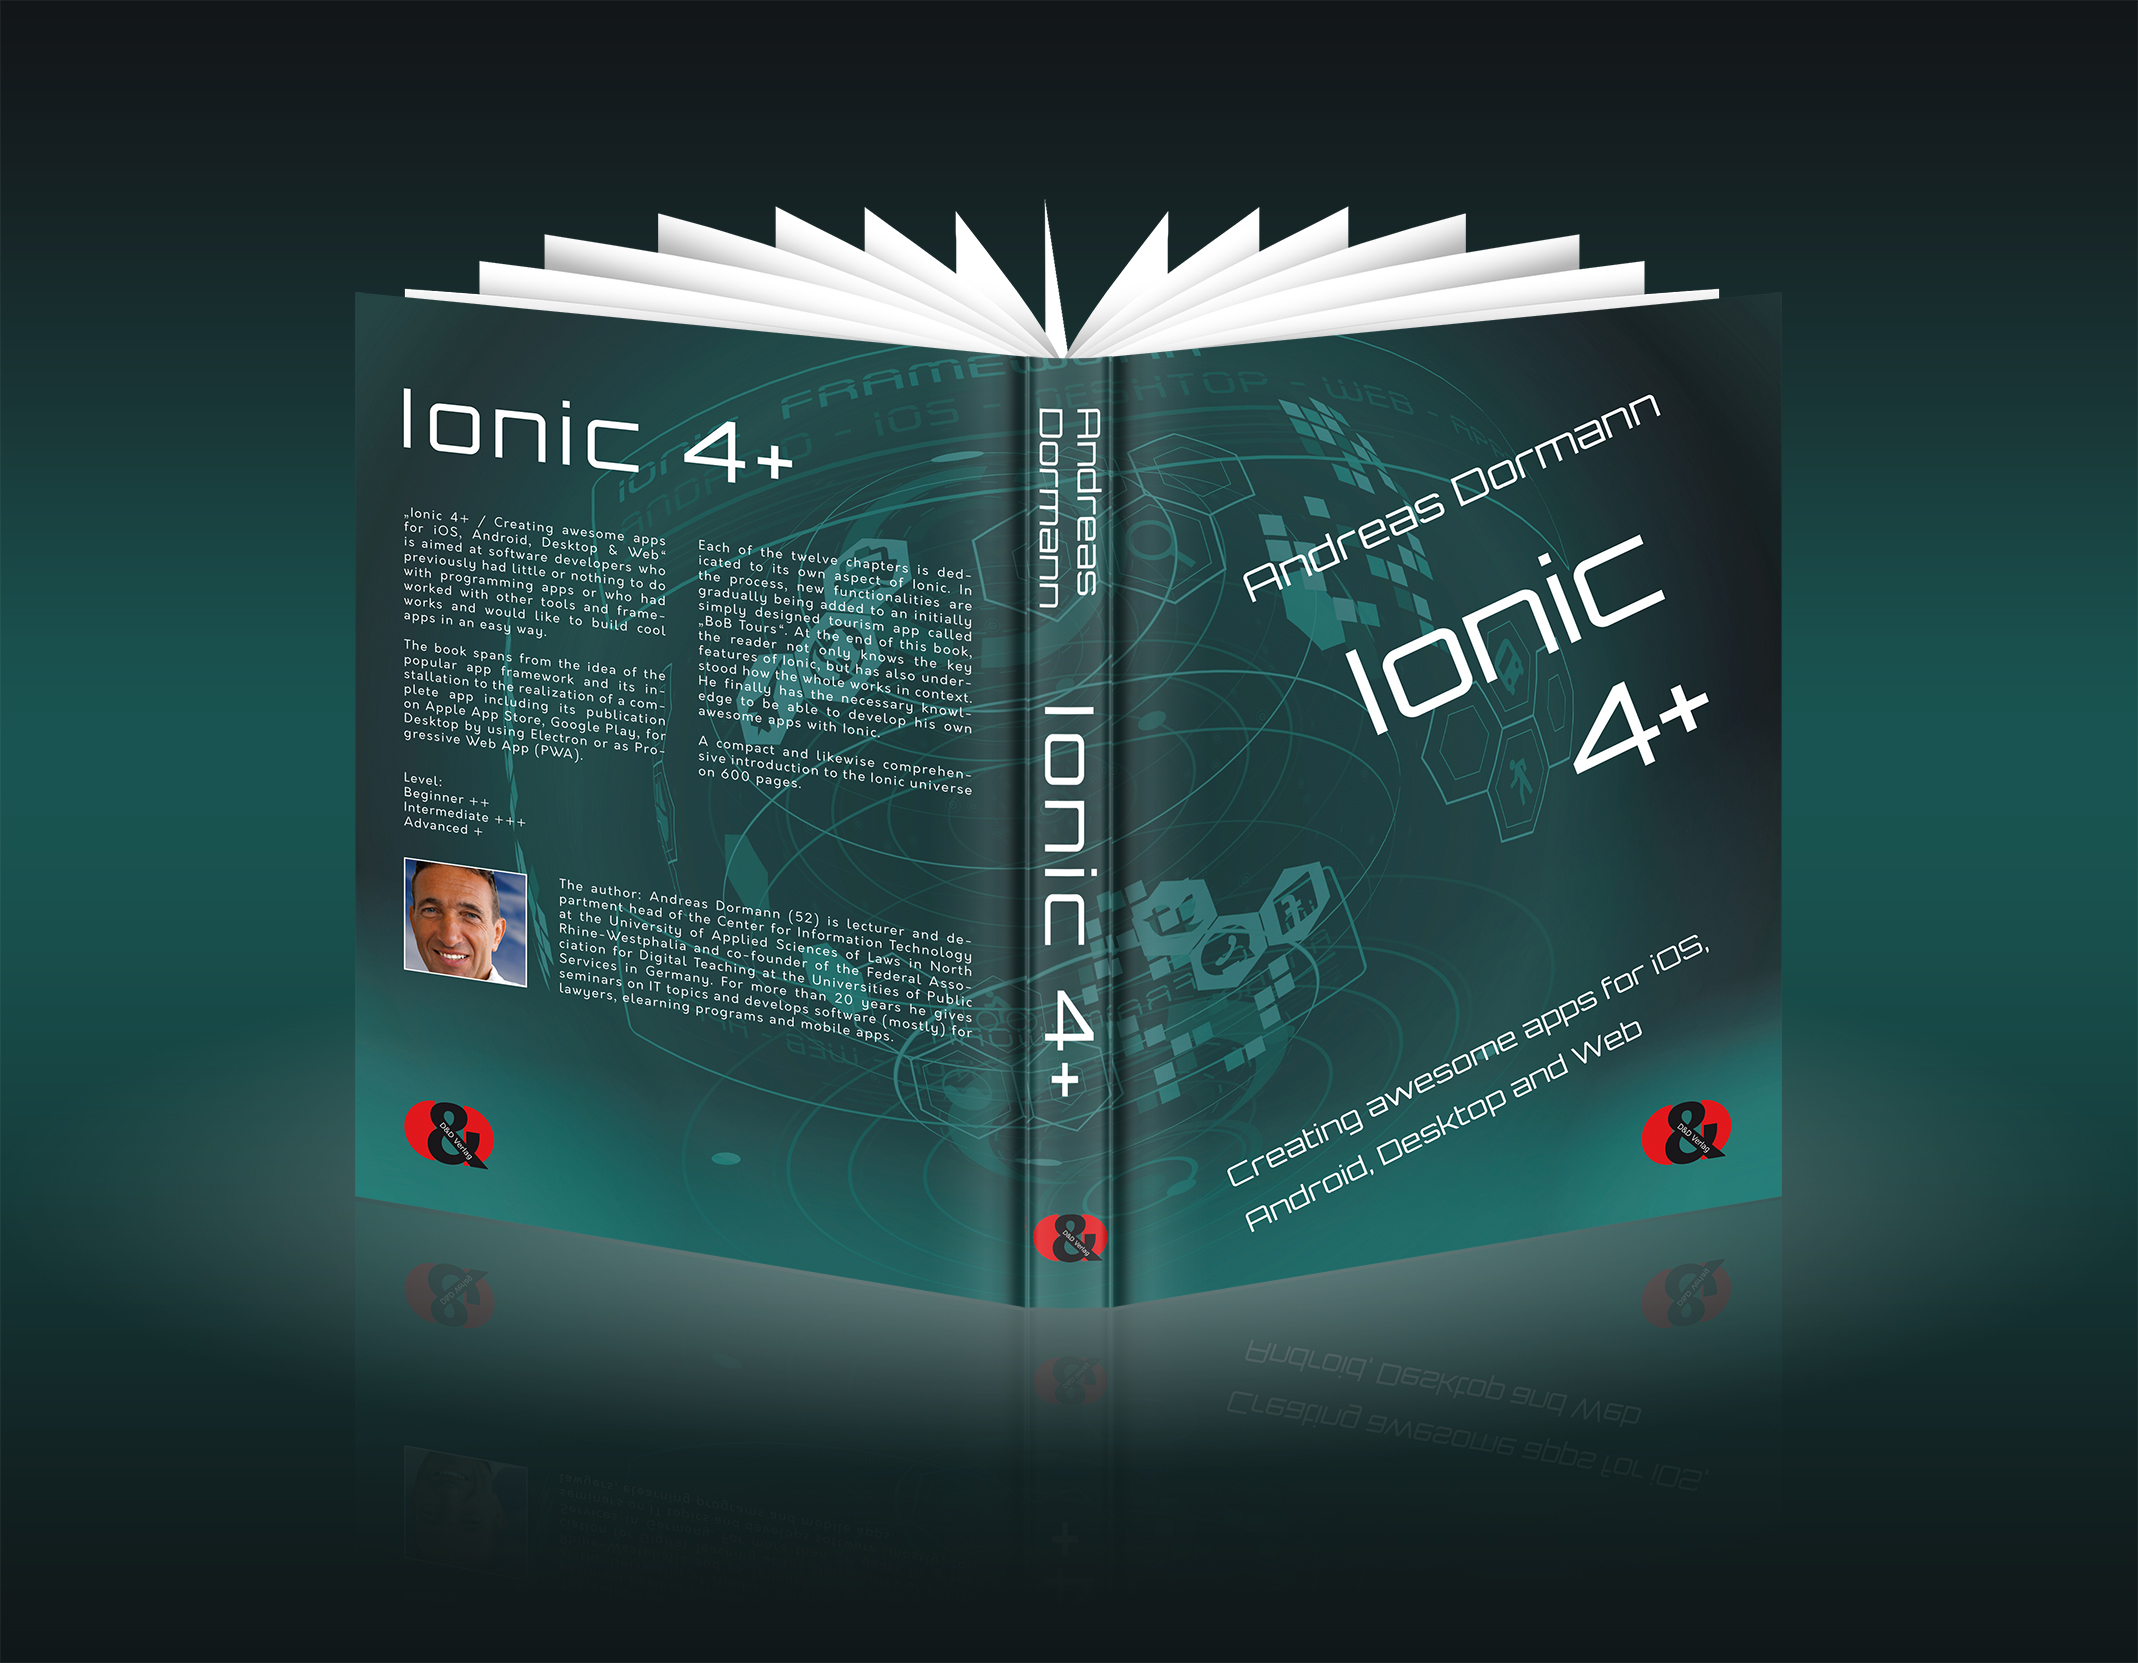 Ionic 4+ is here!